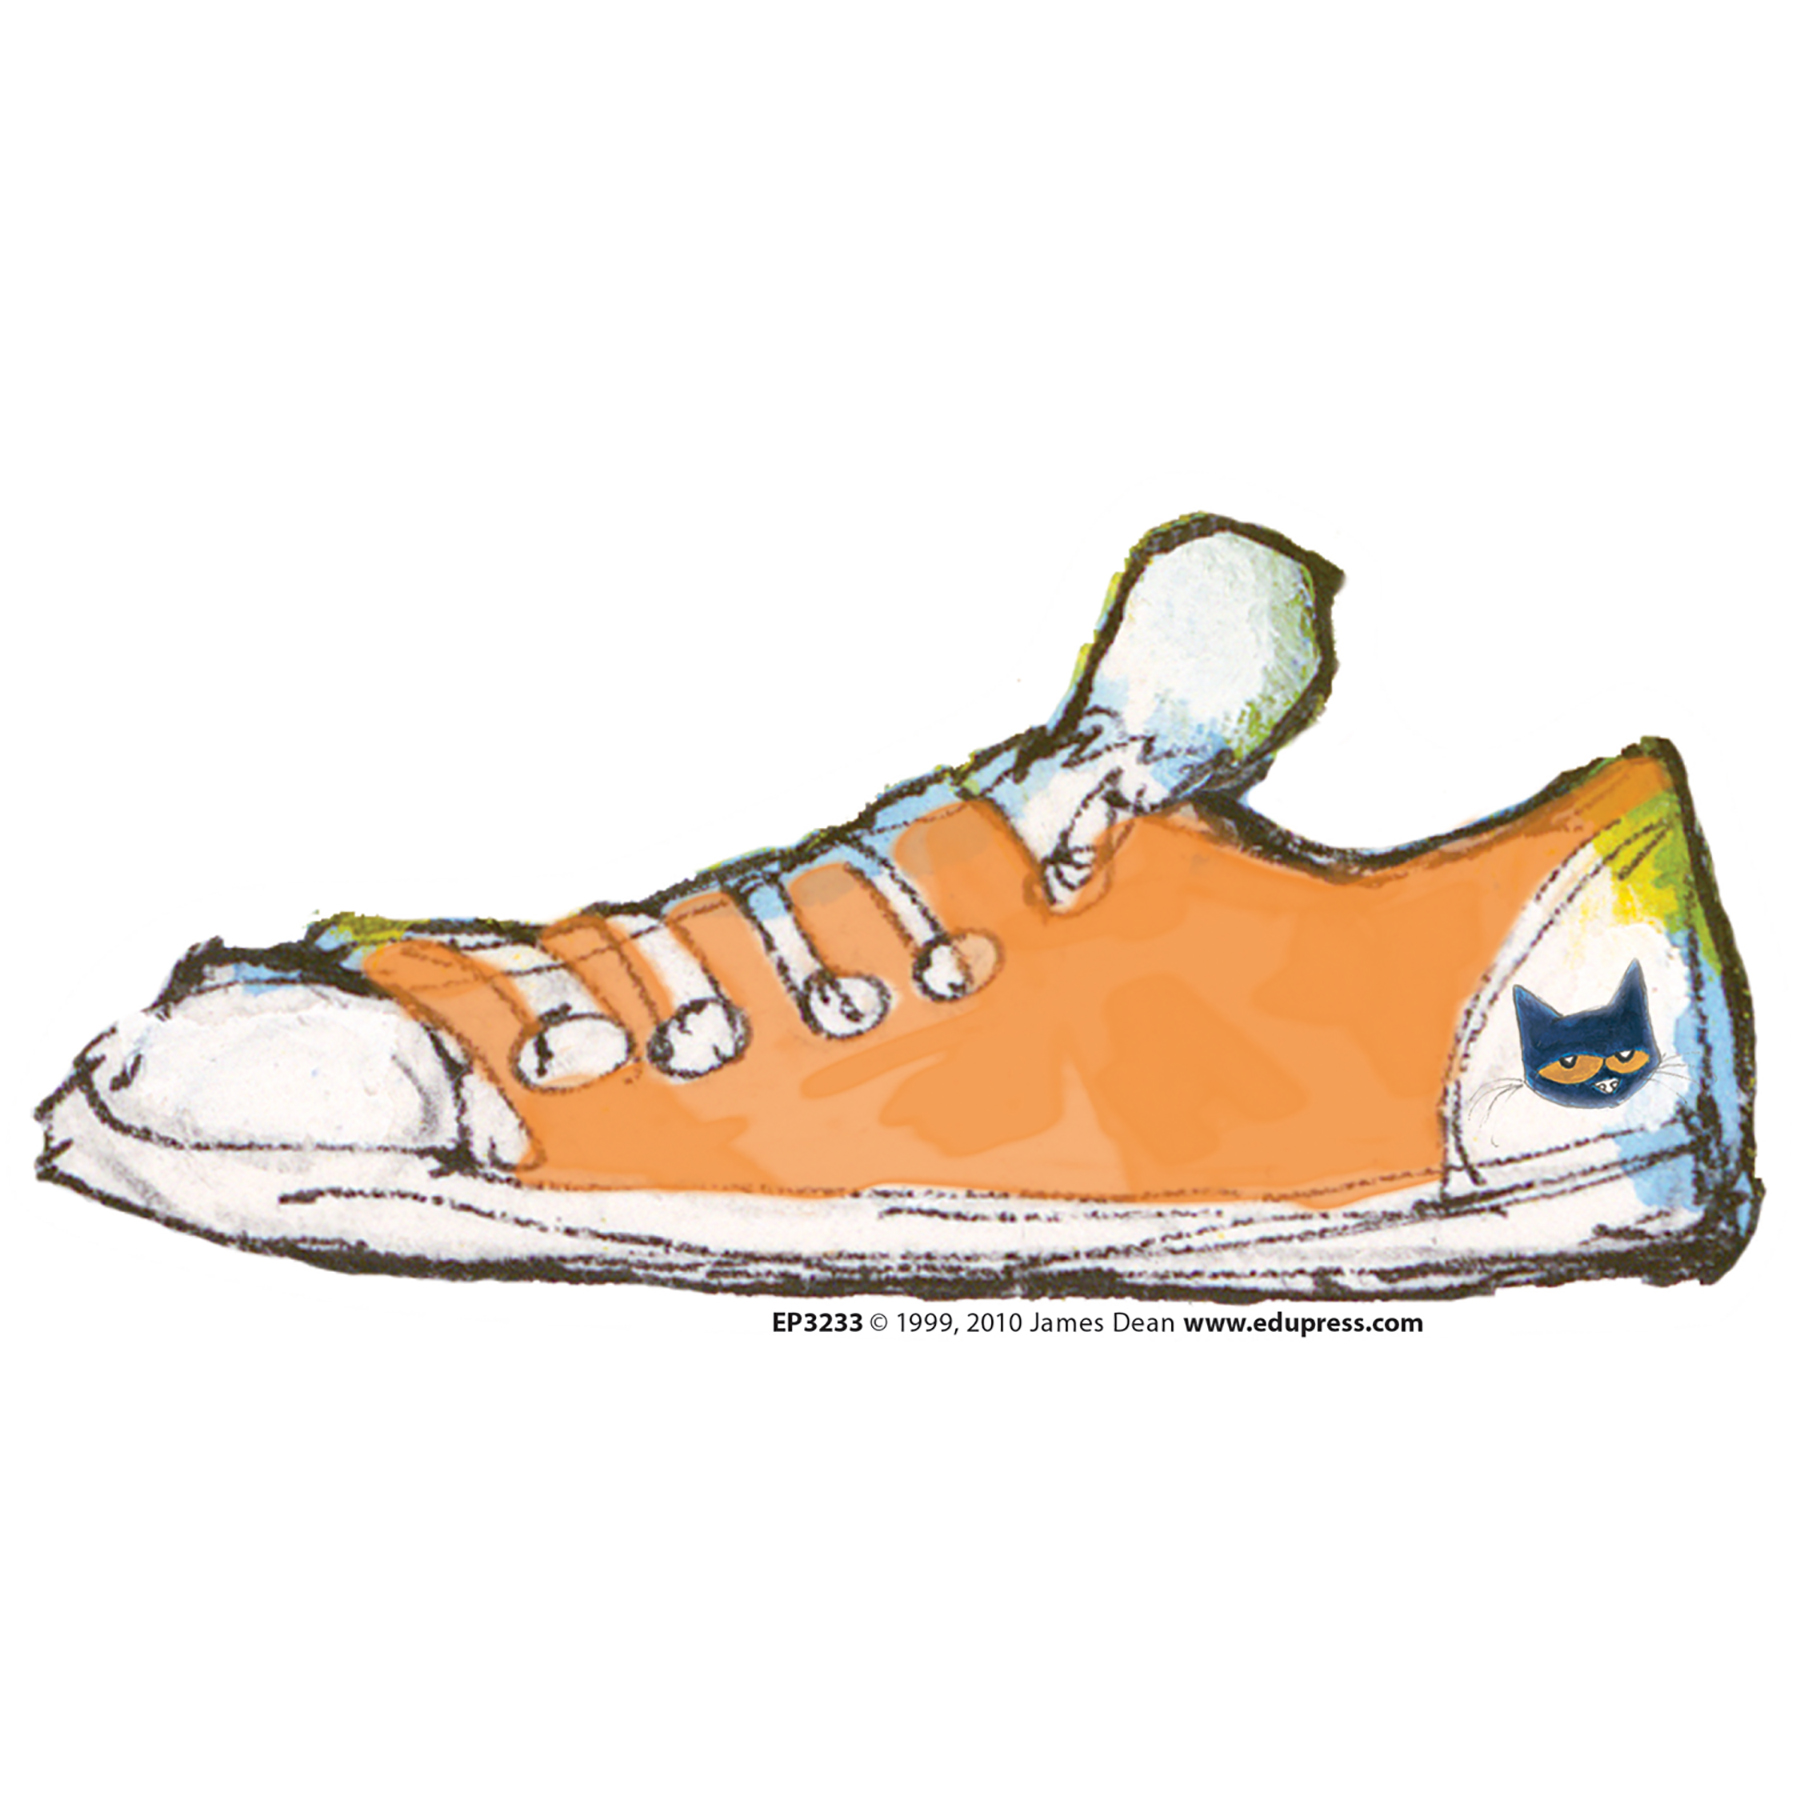 Groovy Shoe Embroidery Design | EmbroideryDesigns.com